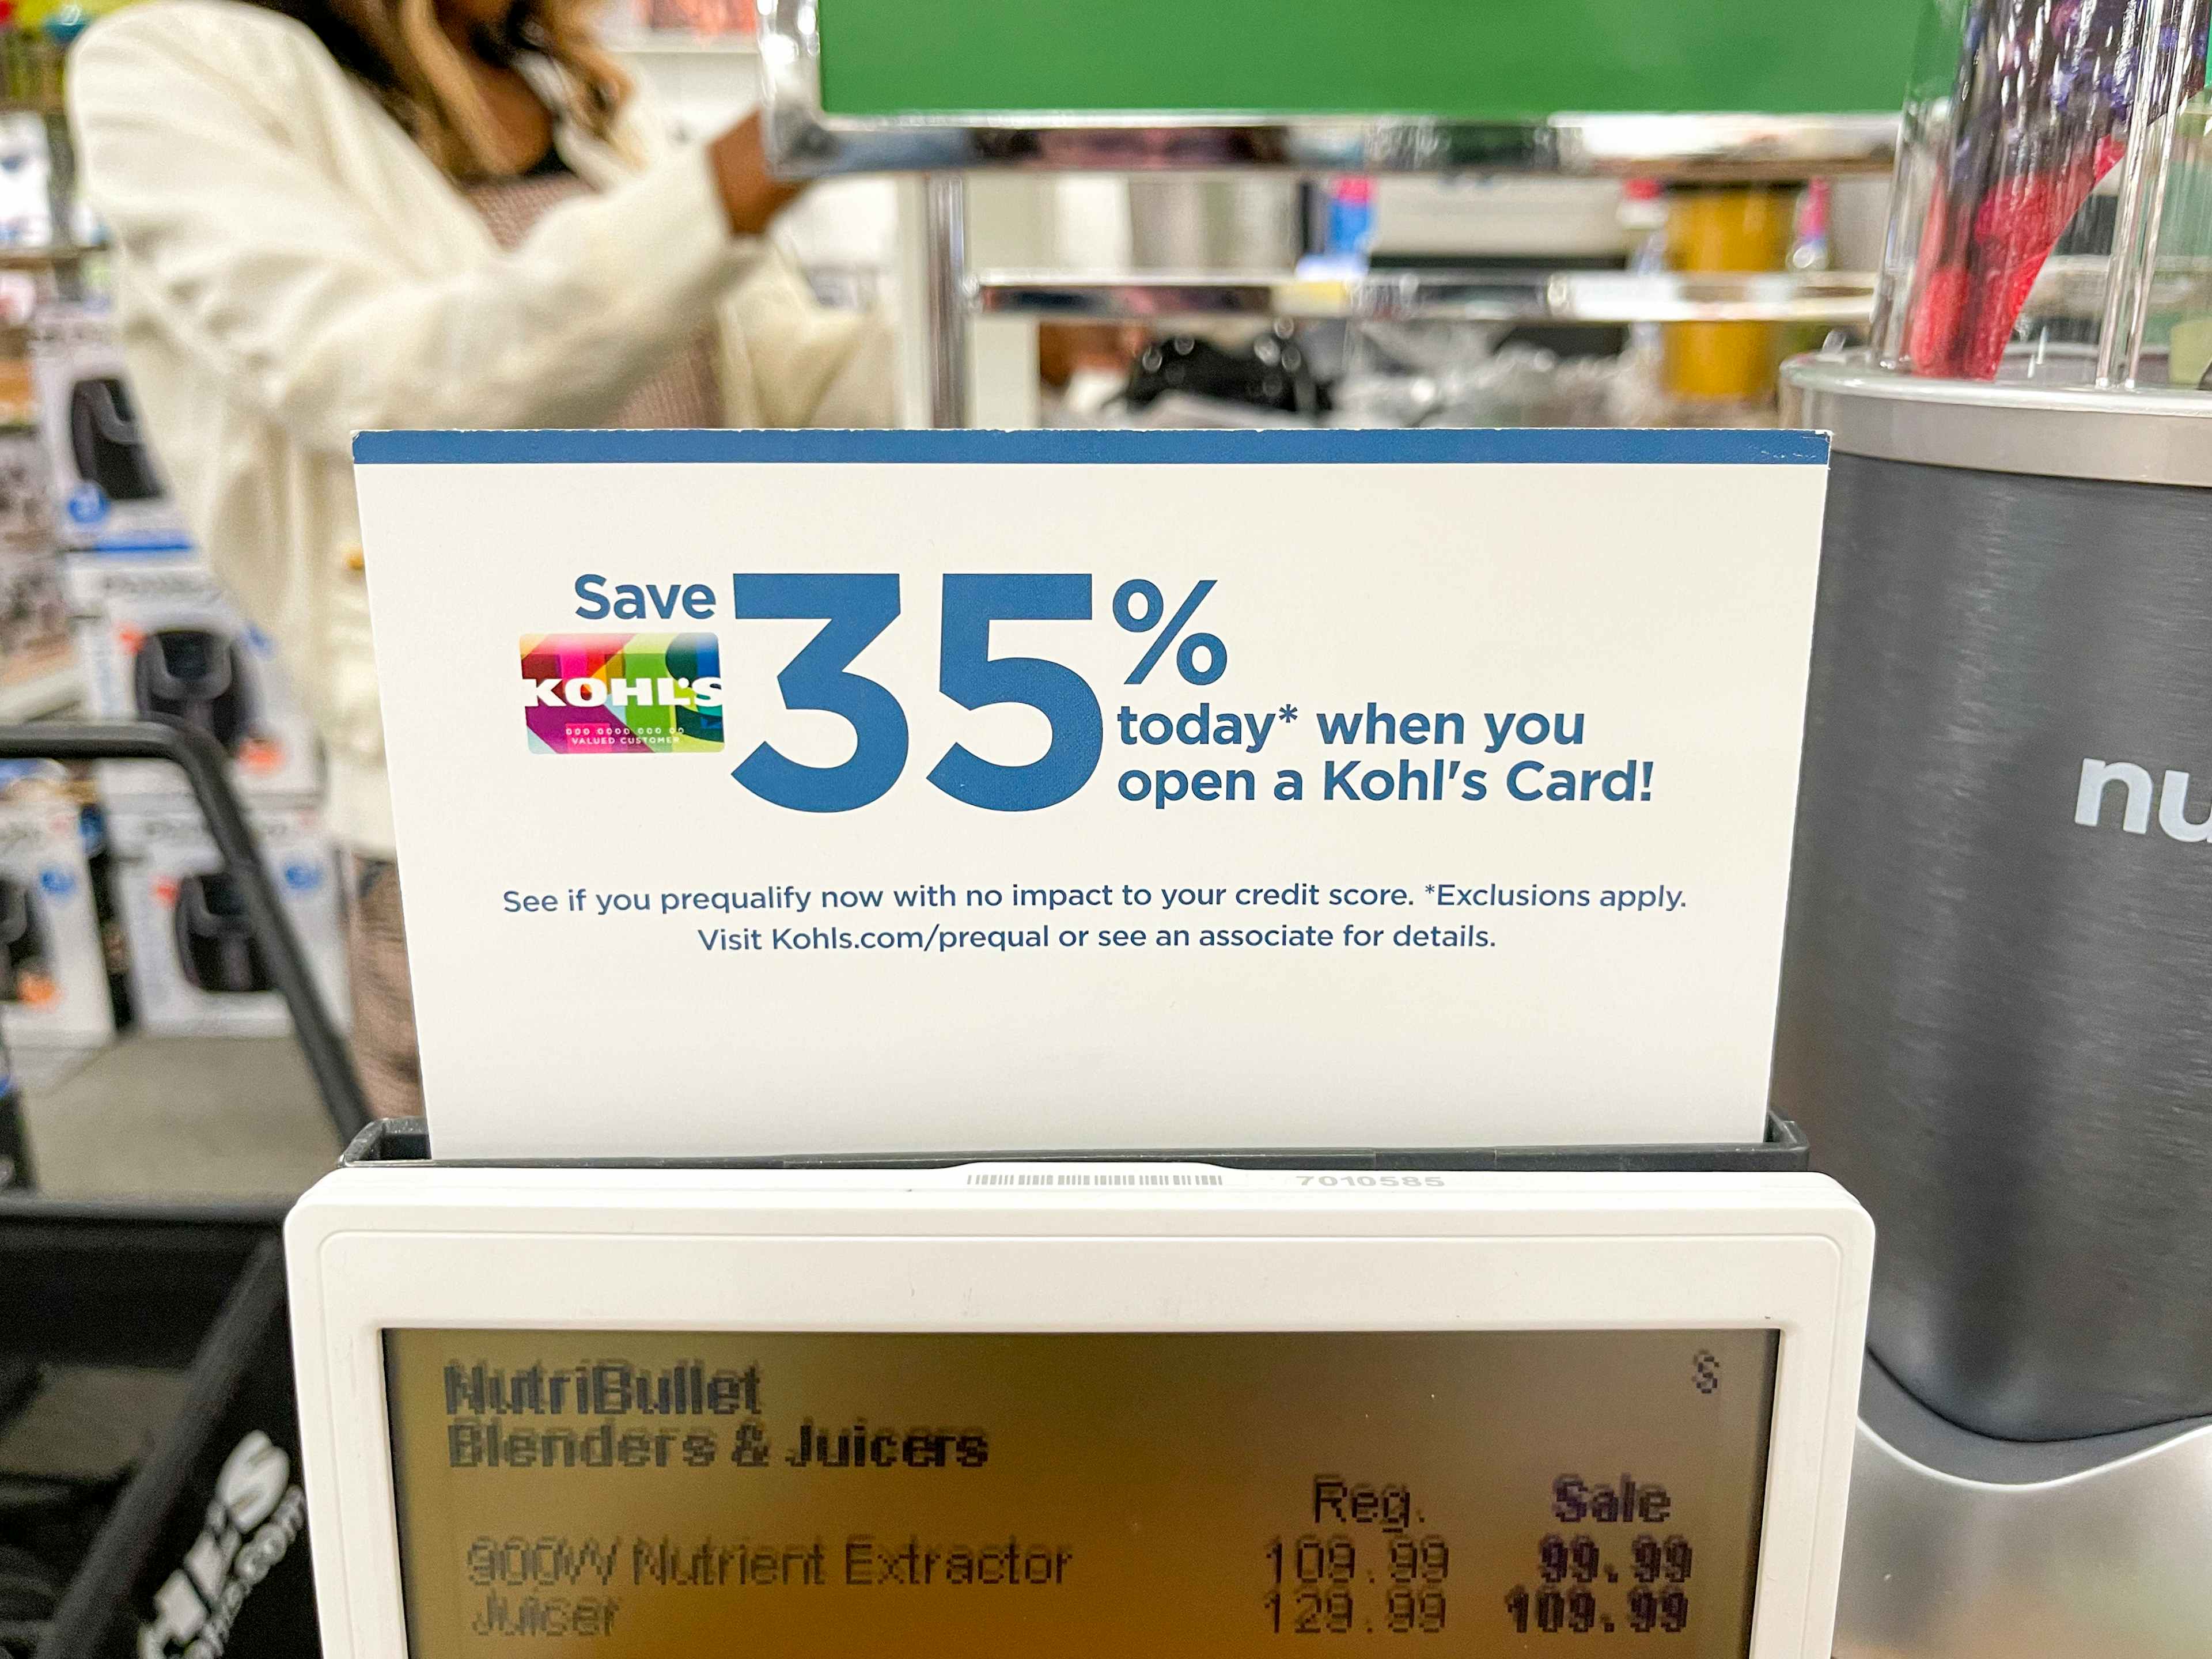 A sign indicating 35% off your first purchase with the Kohl's credit card.